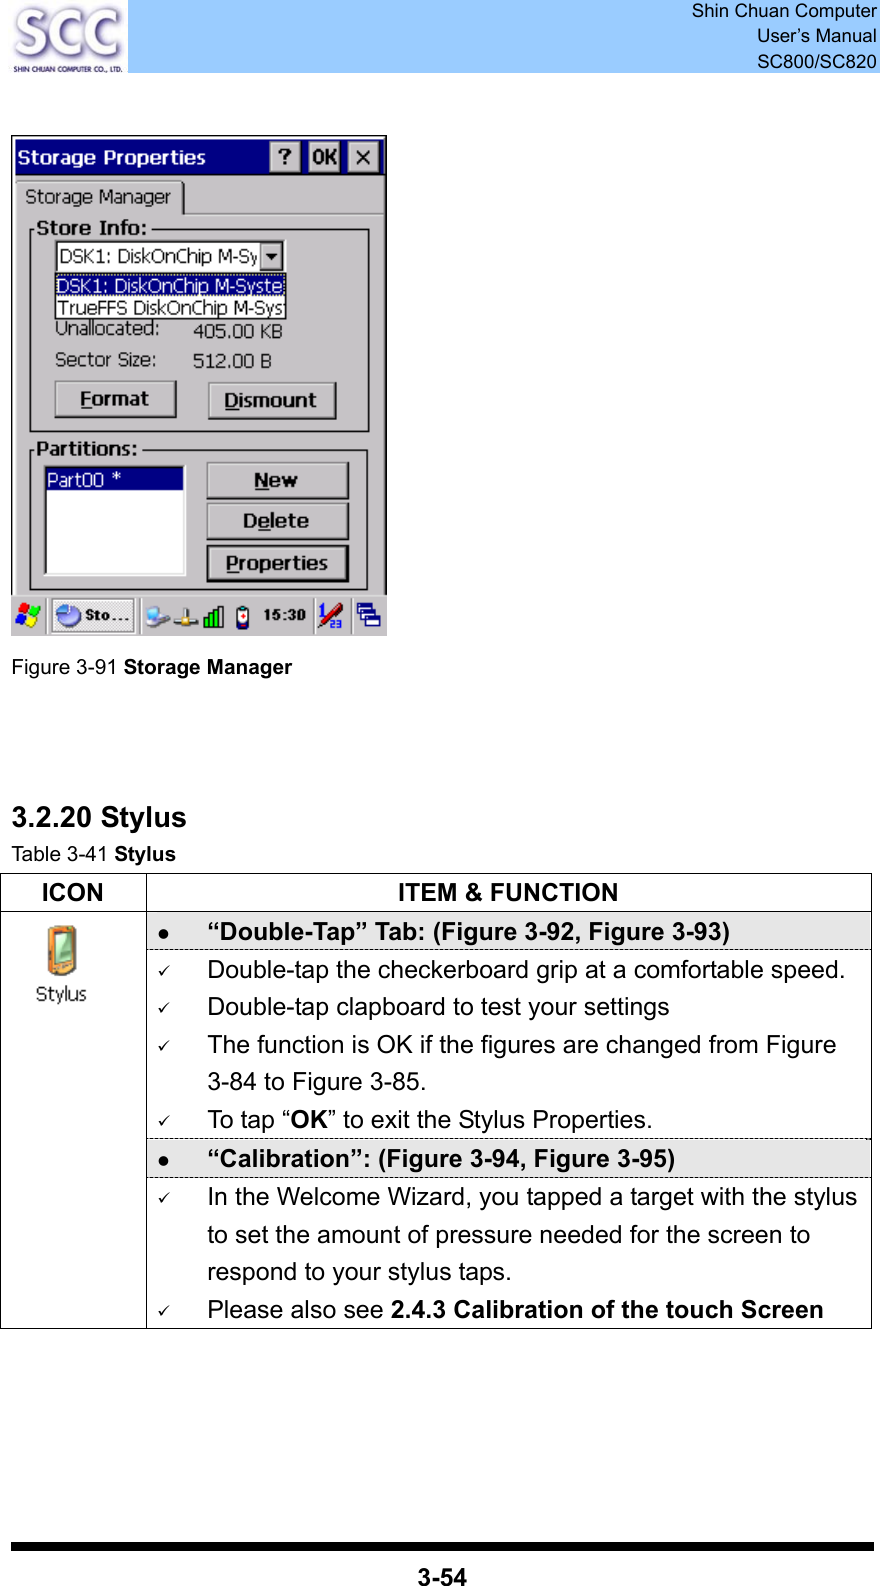  Shin Chuan Computer User’s Manual SC800/SC820  3-54     Figure 3-91 Storage Manager    3.2.20 Stylus Table 3-41 Stylus ICON  ITEM &amp; FUNCTION z “Double-Tap” Tab: (Figure 3-92, Figure 3-93) 9 Double-tap the checkerboard grip at a comfortable speed. 9 Double-tap clapboard to test your settings 9 The function is OK if the figures are changed from Figure 3-84 to Figure 3-85. 9 To tap “OK” to exit the Stylus Properties. z “Calibration”: (Figure 3-94, Figure 3-95)  9 In the Welcome Wizard, you tapped a target with the stylus to set the amount of pressure needed for the screen to respond to your stylus taps. 9 Please also see 2.4.3 Calibration of the touch Screen     